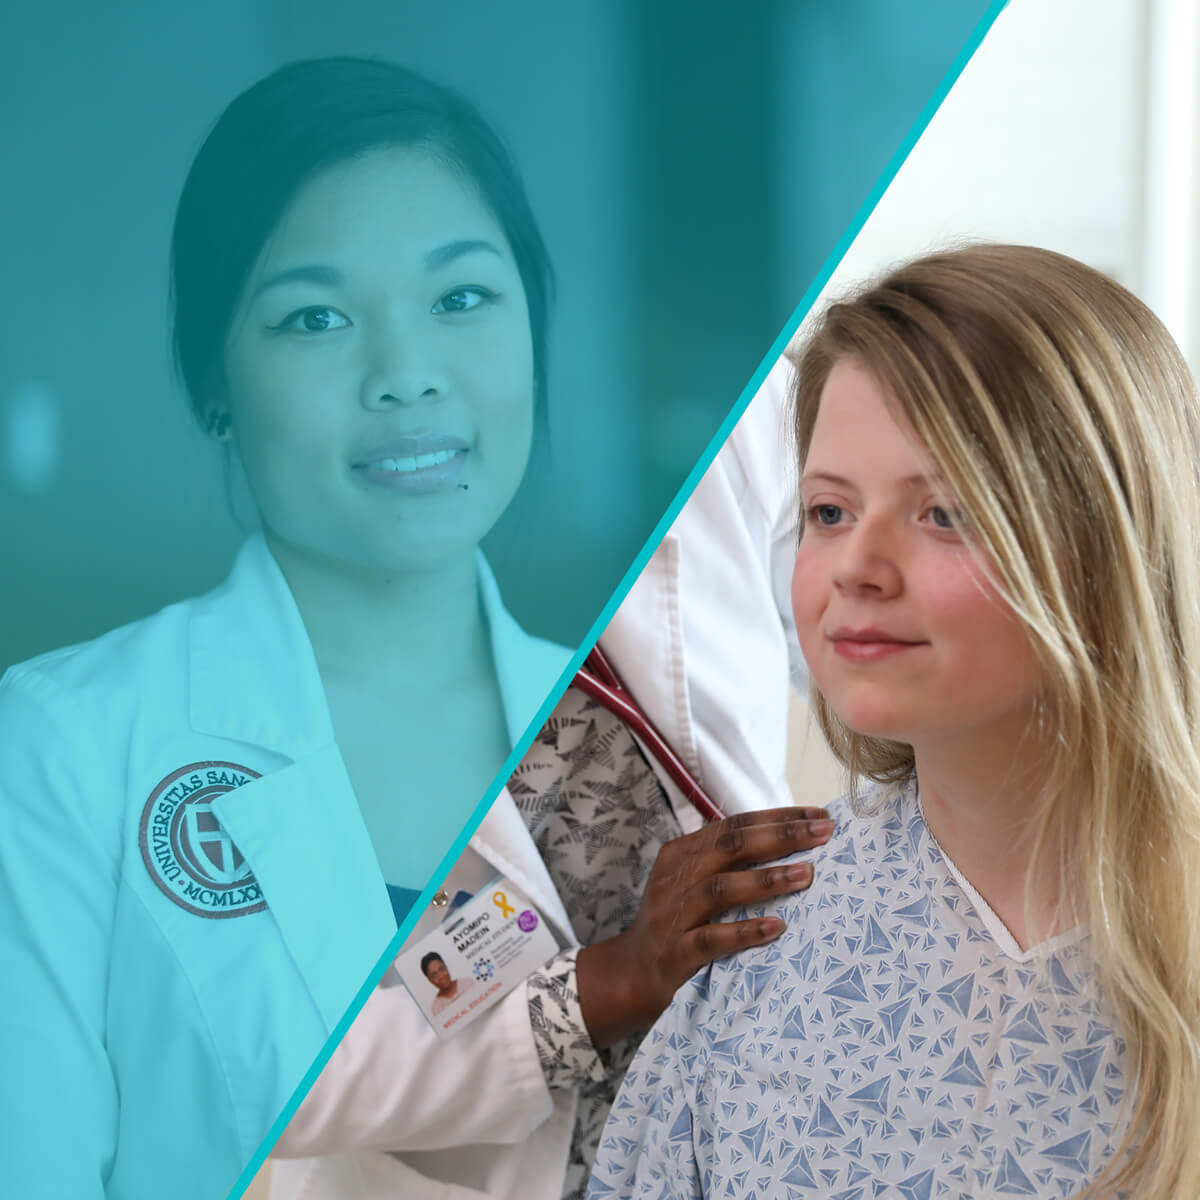 Split-screen image that shows an SGU physician posing for a photo on the left and a clinical student examining a patient on the right.